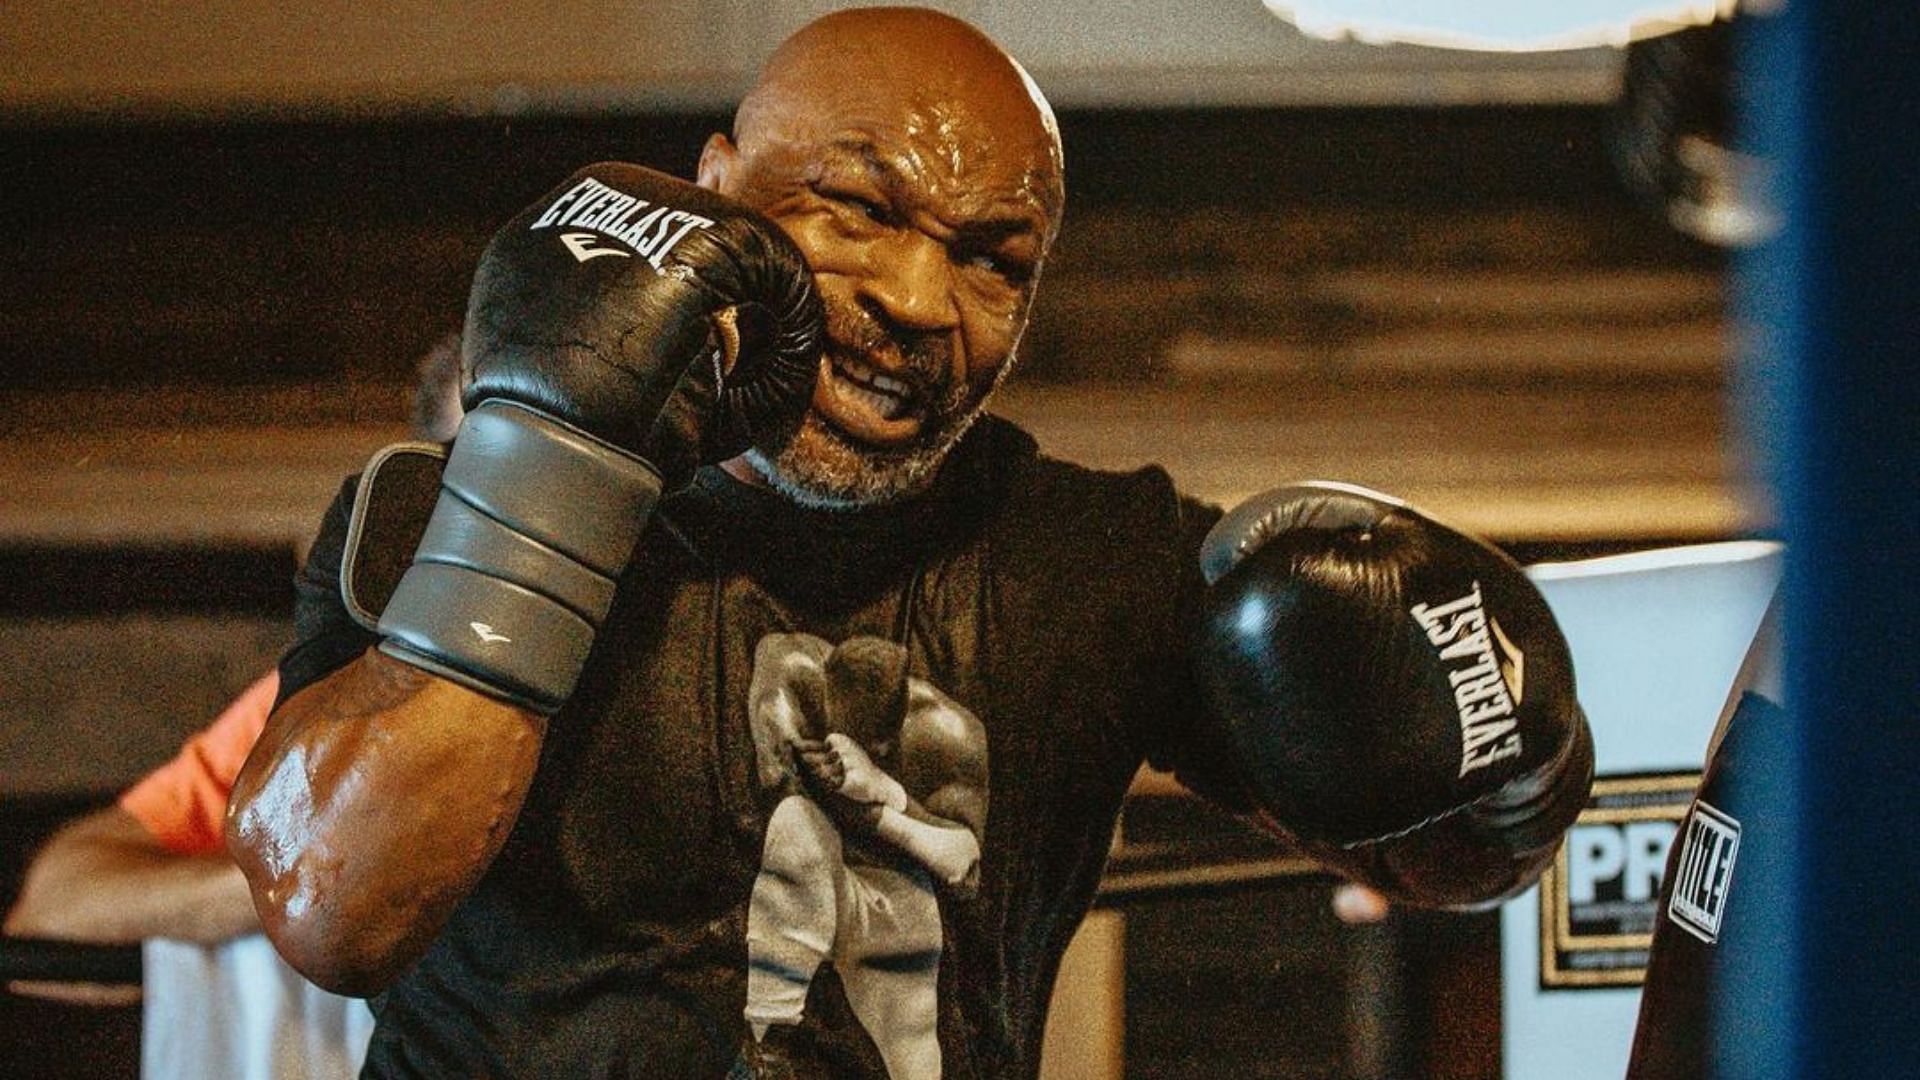 Mike Tyson spotted in an intense sparring session